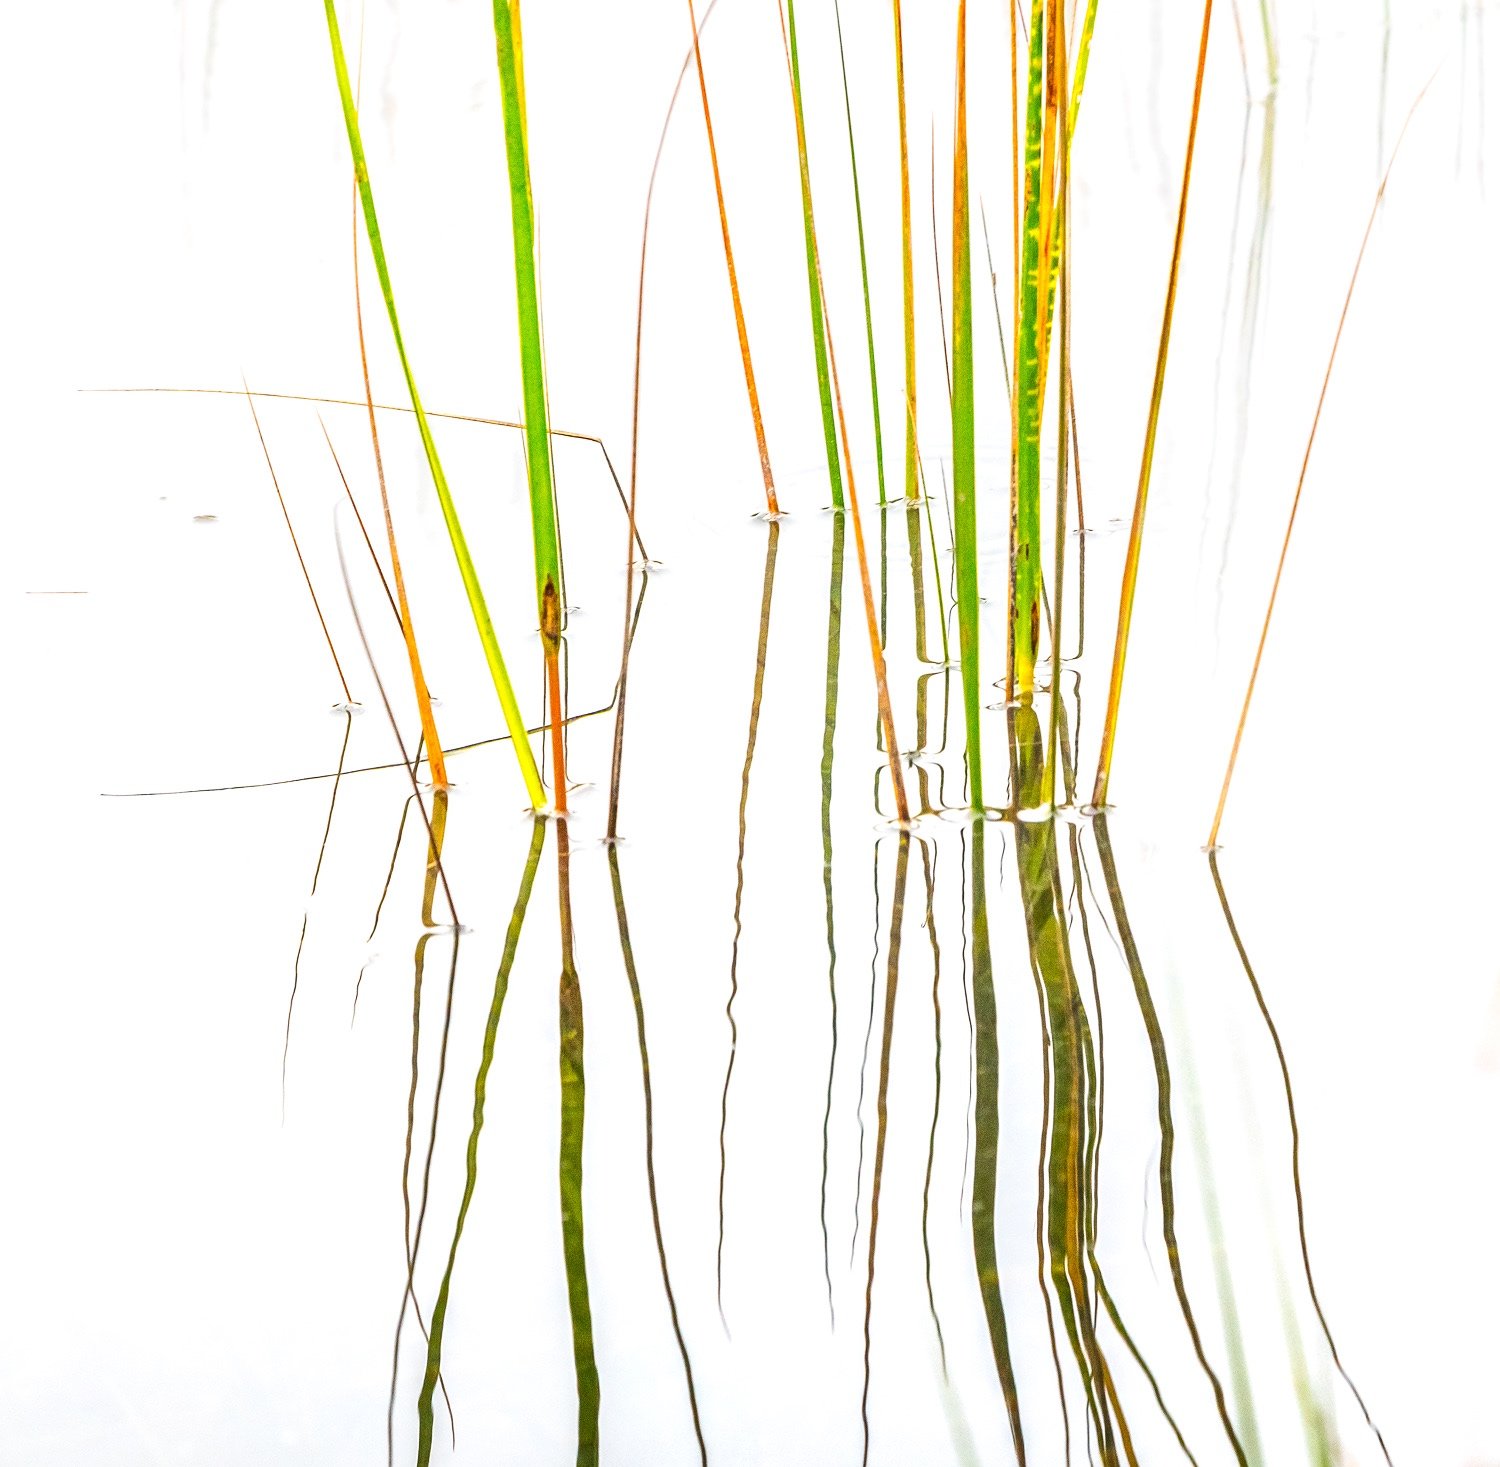  Grass abstracts 